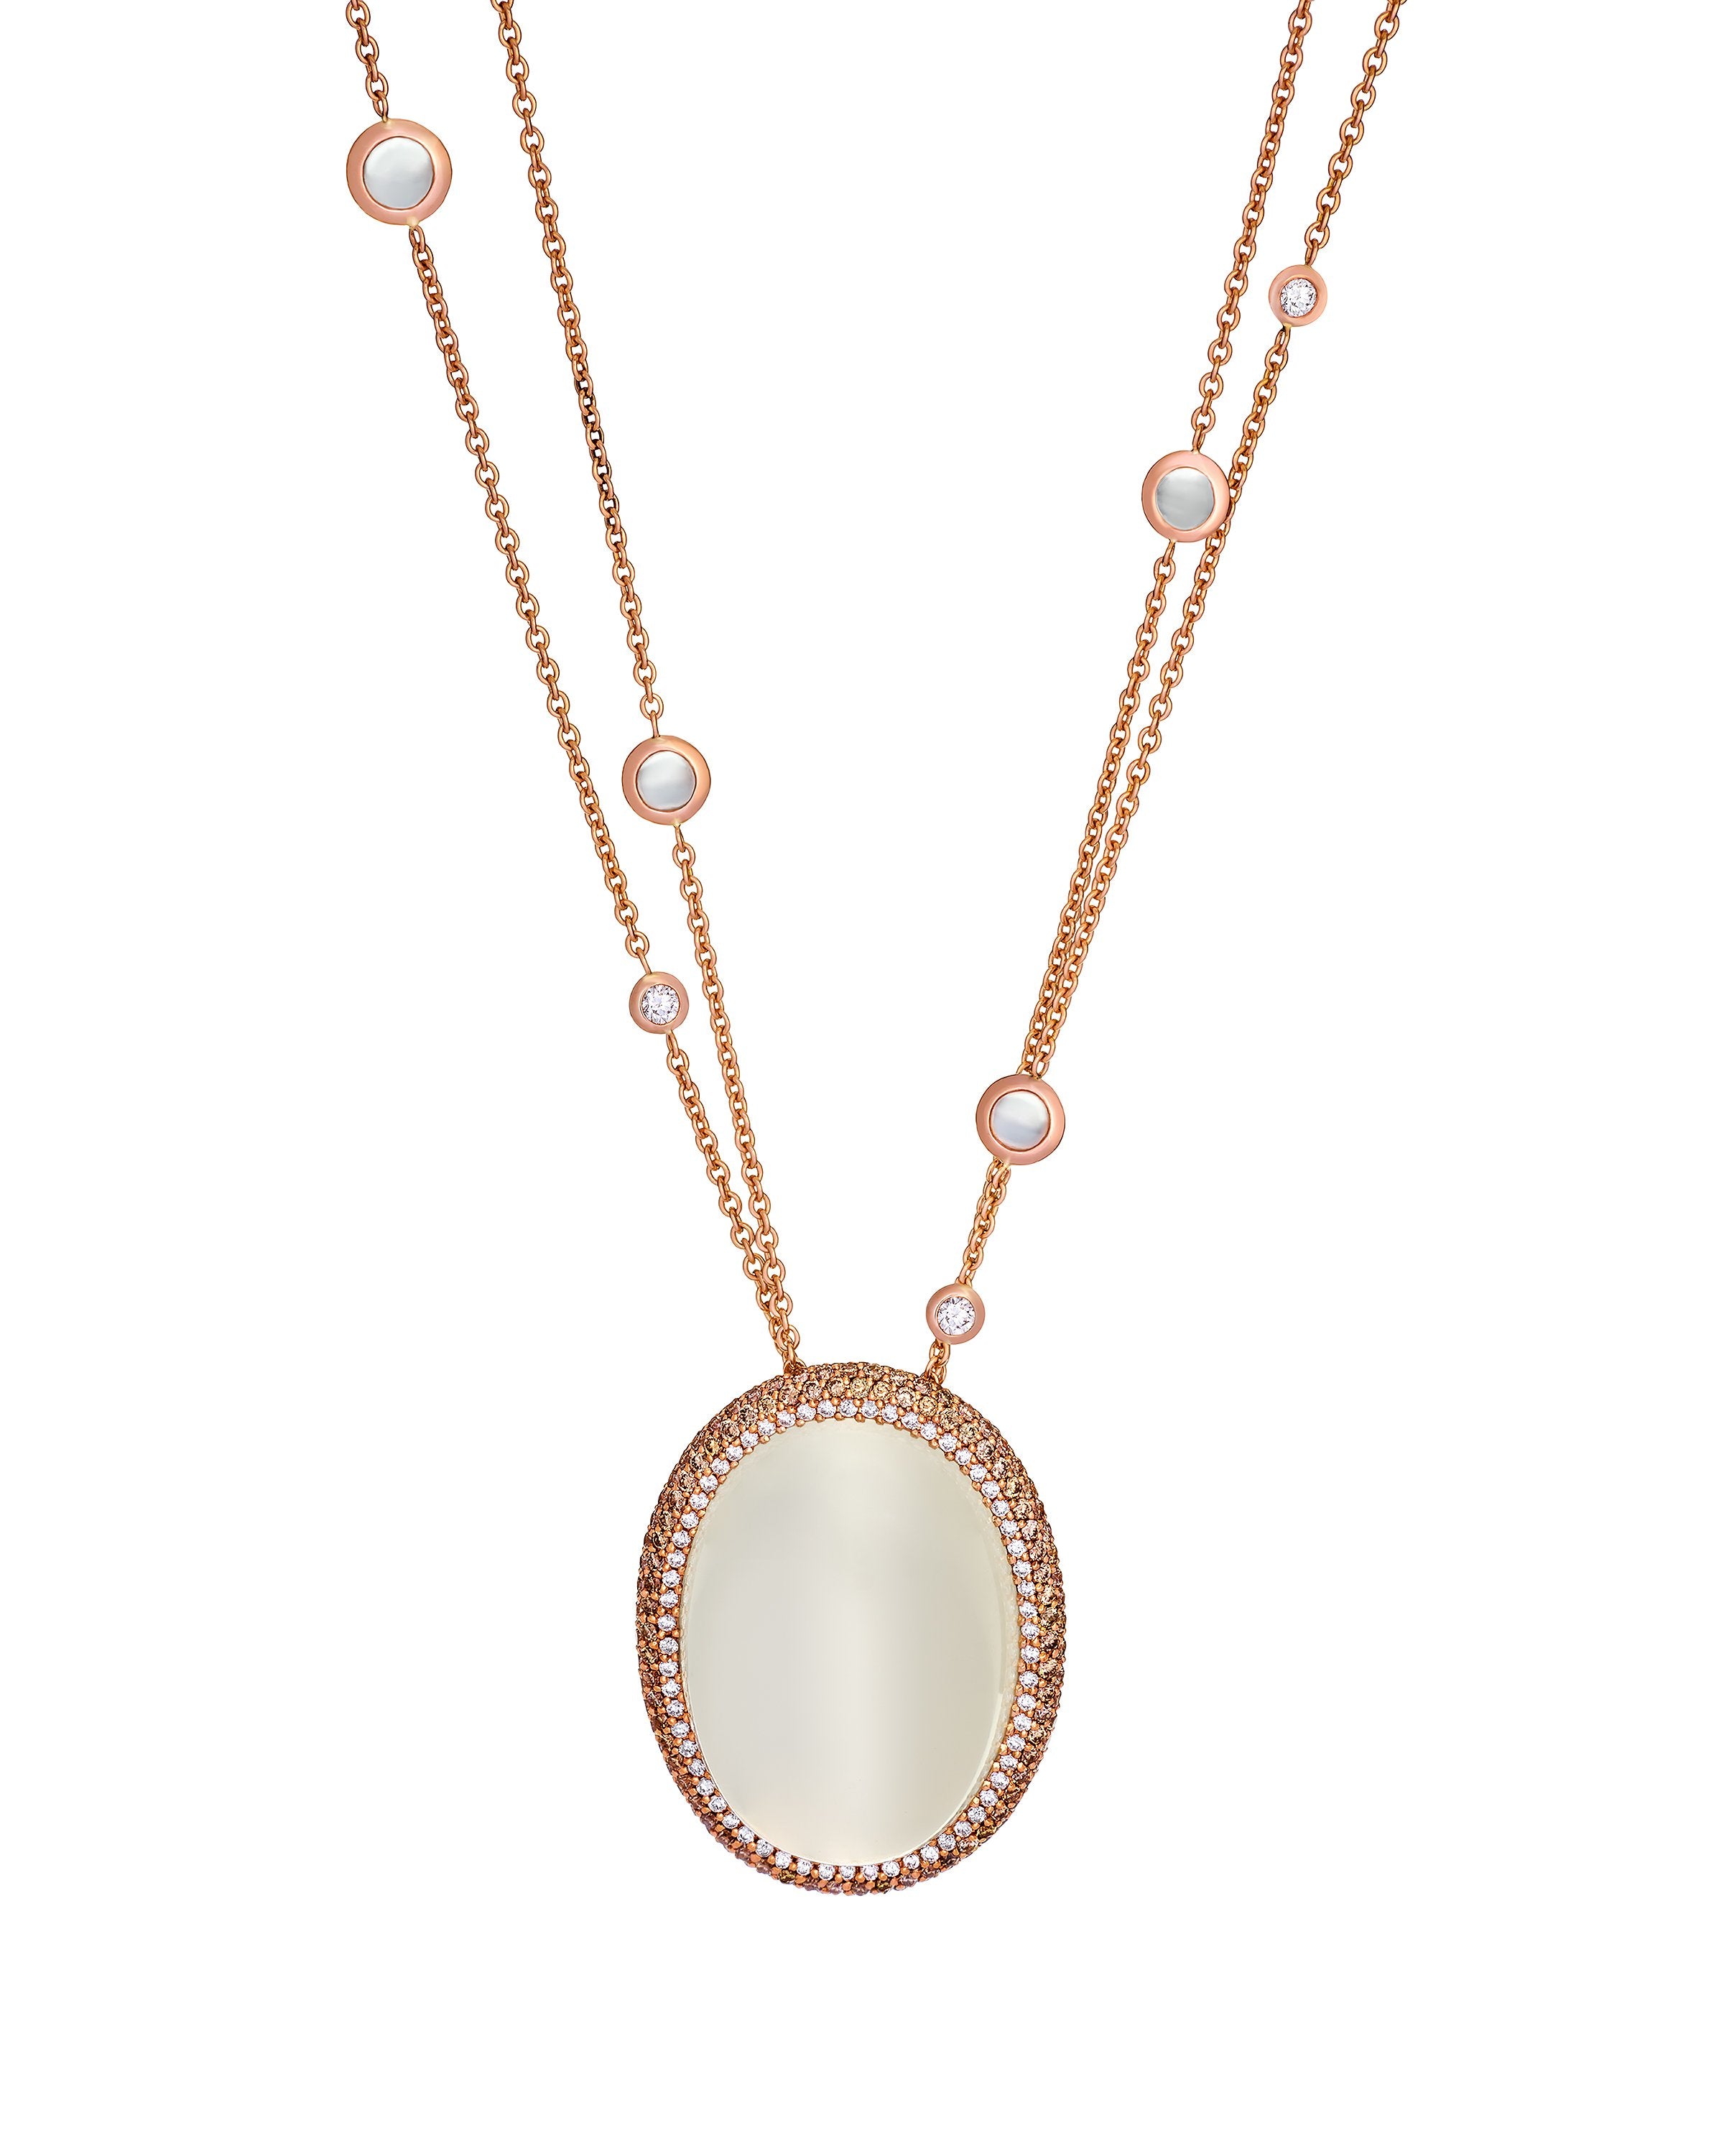 Moonstone pendant surrounded by diamonds, dropping from an 18 karat rose gold chain with diamonds and moonstones.